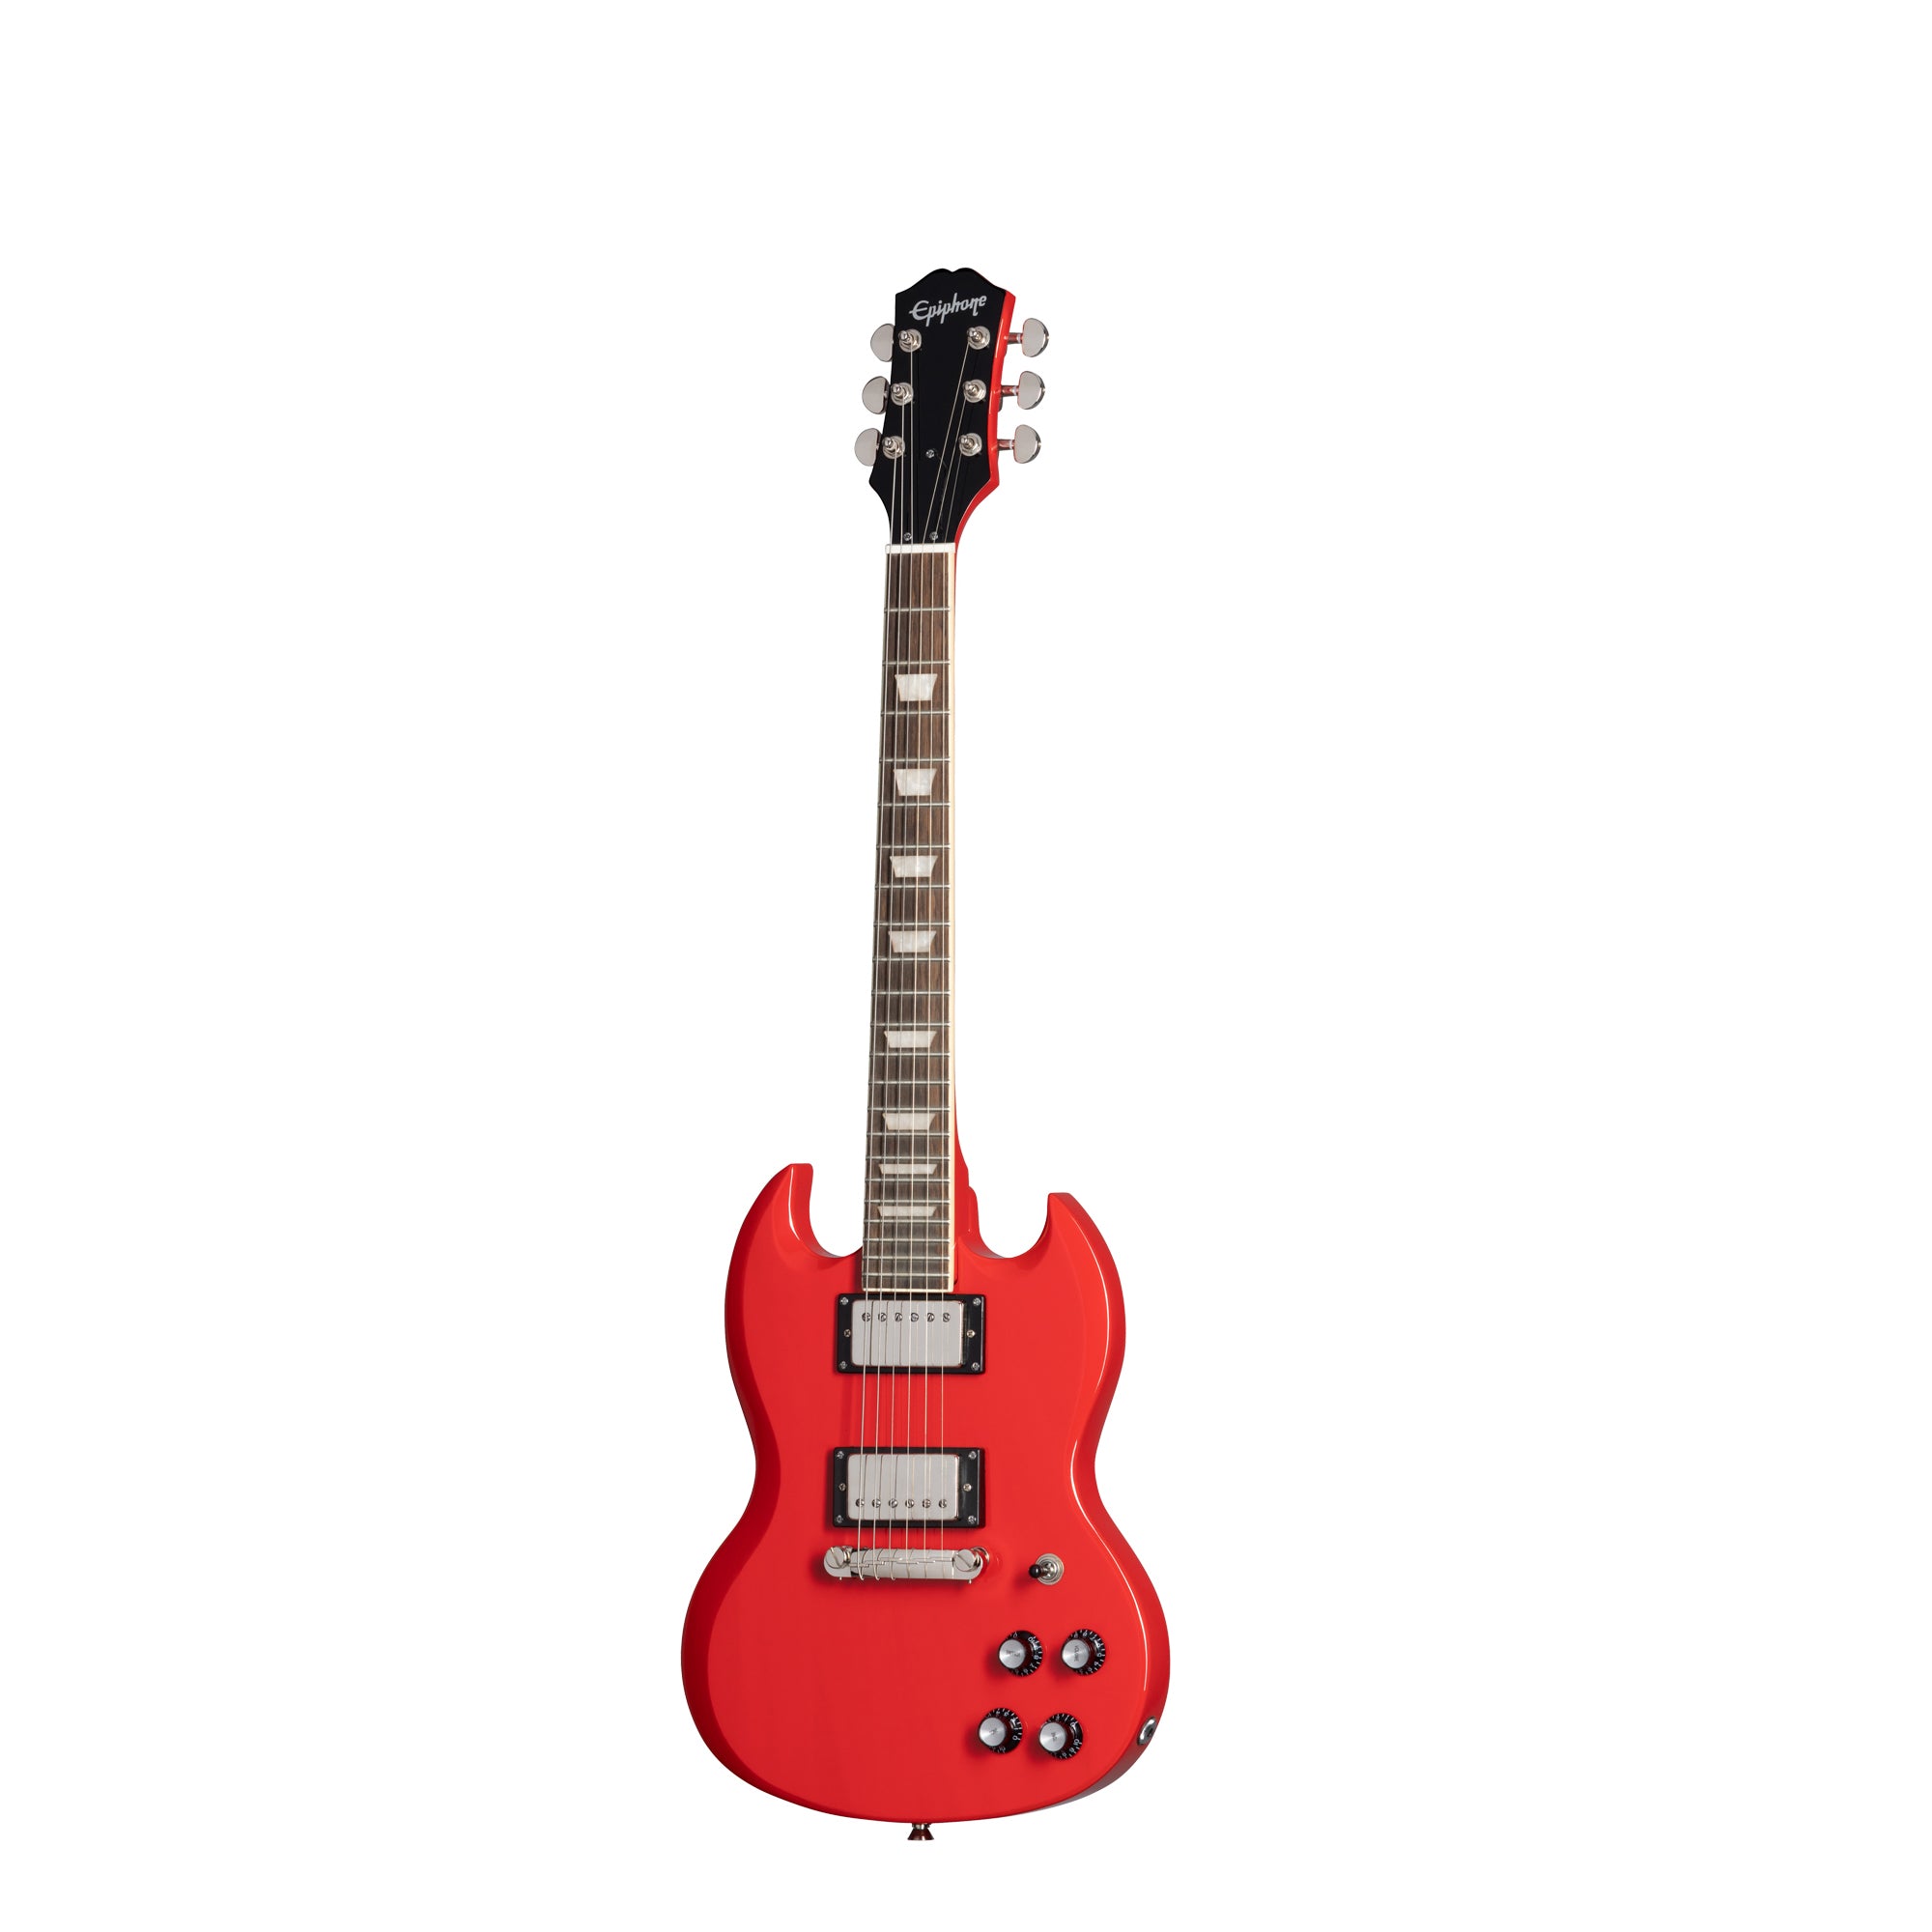 Epiphone ES1PPSGRANH1 Power Players SG Lava Red - Incl. Gig bag, Cable, Picks